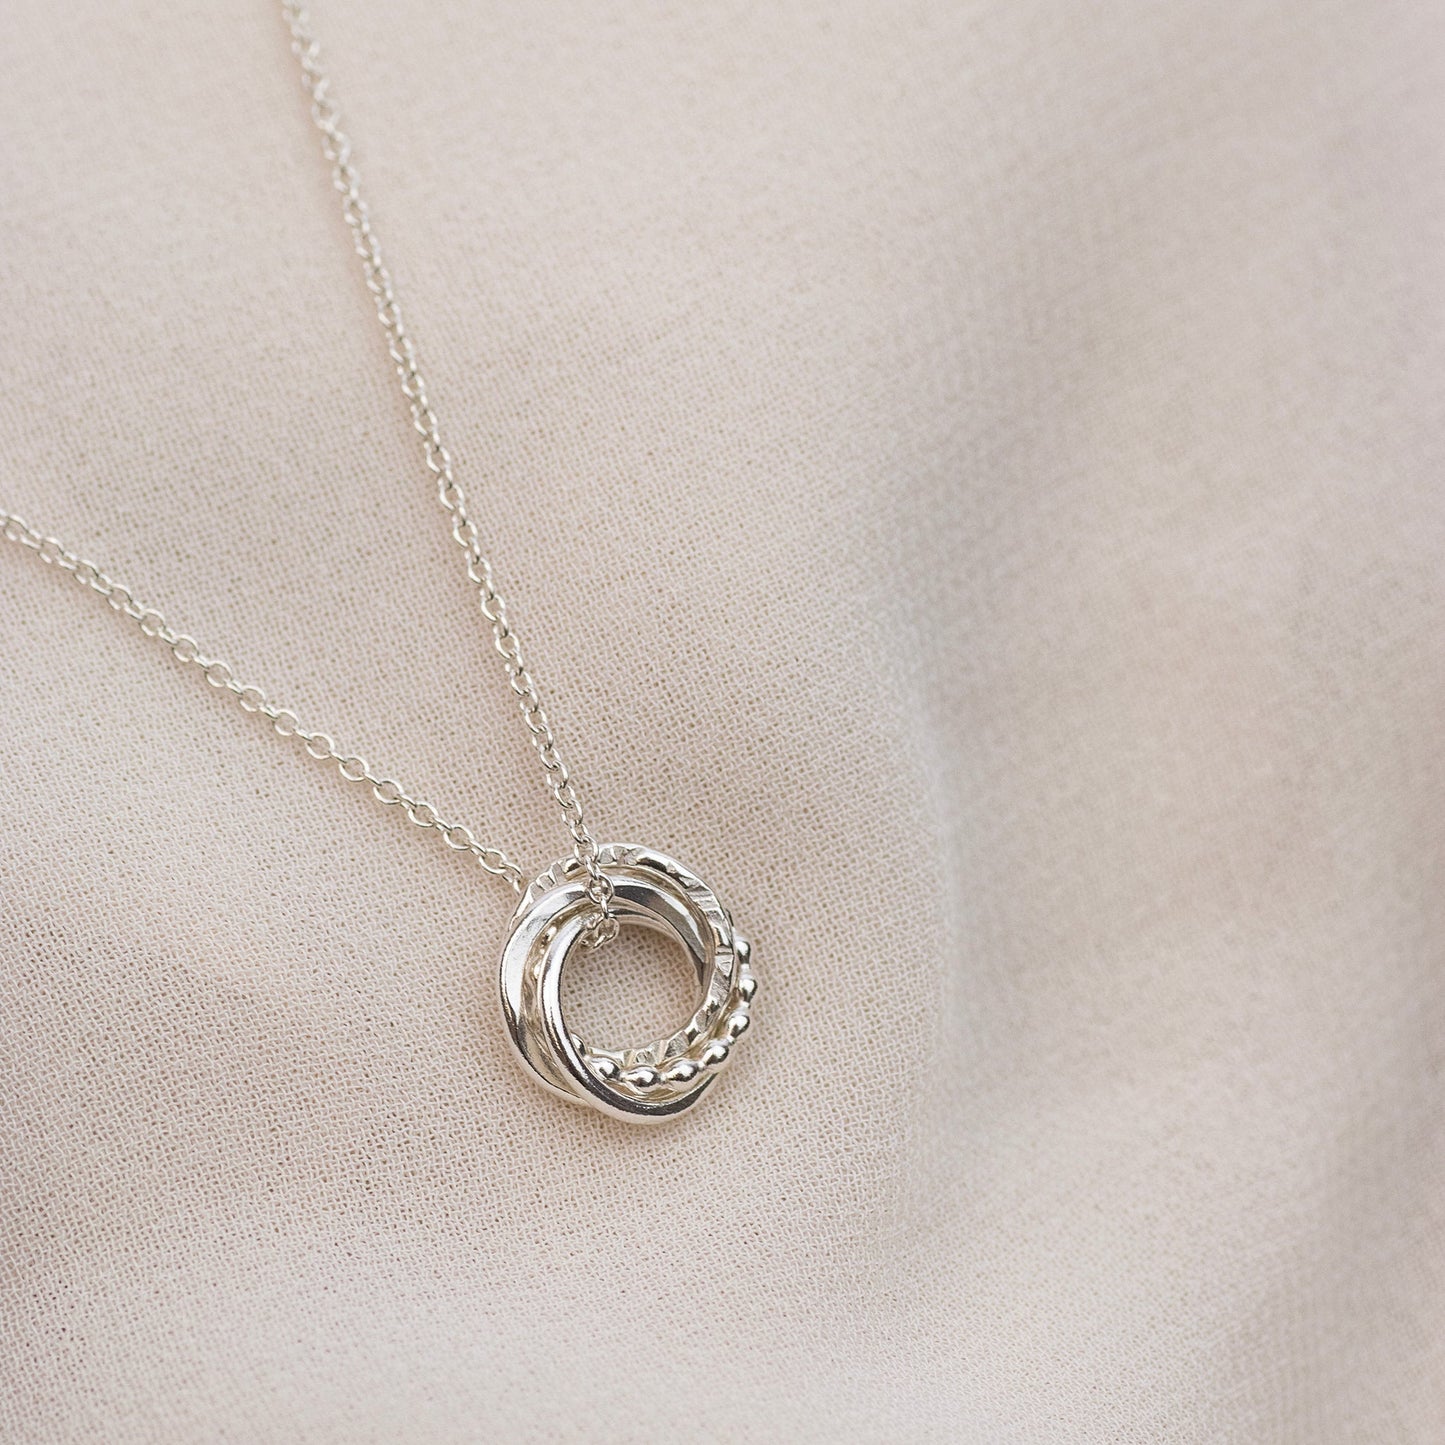 4 Cousins Necklace - Silver Love Knot - Linked for Lifetime